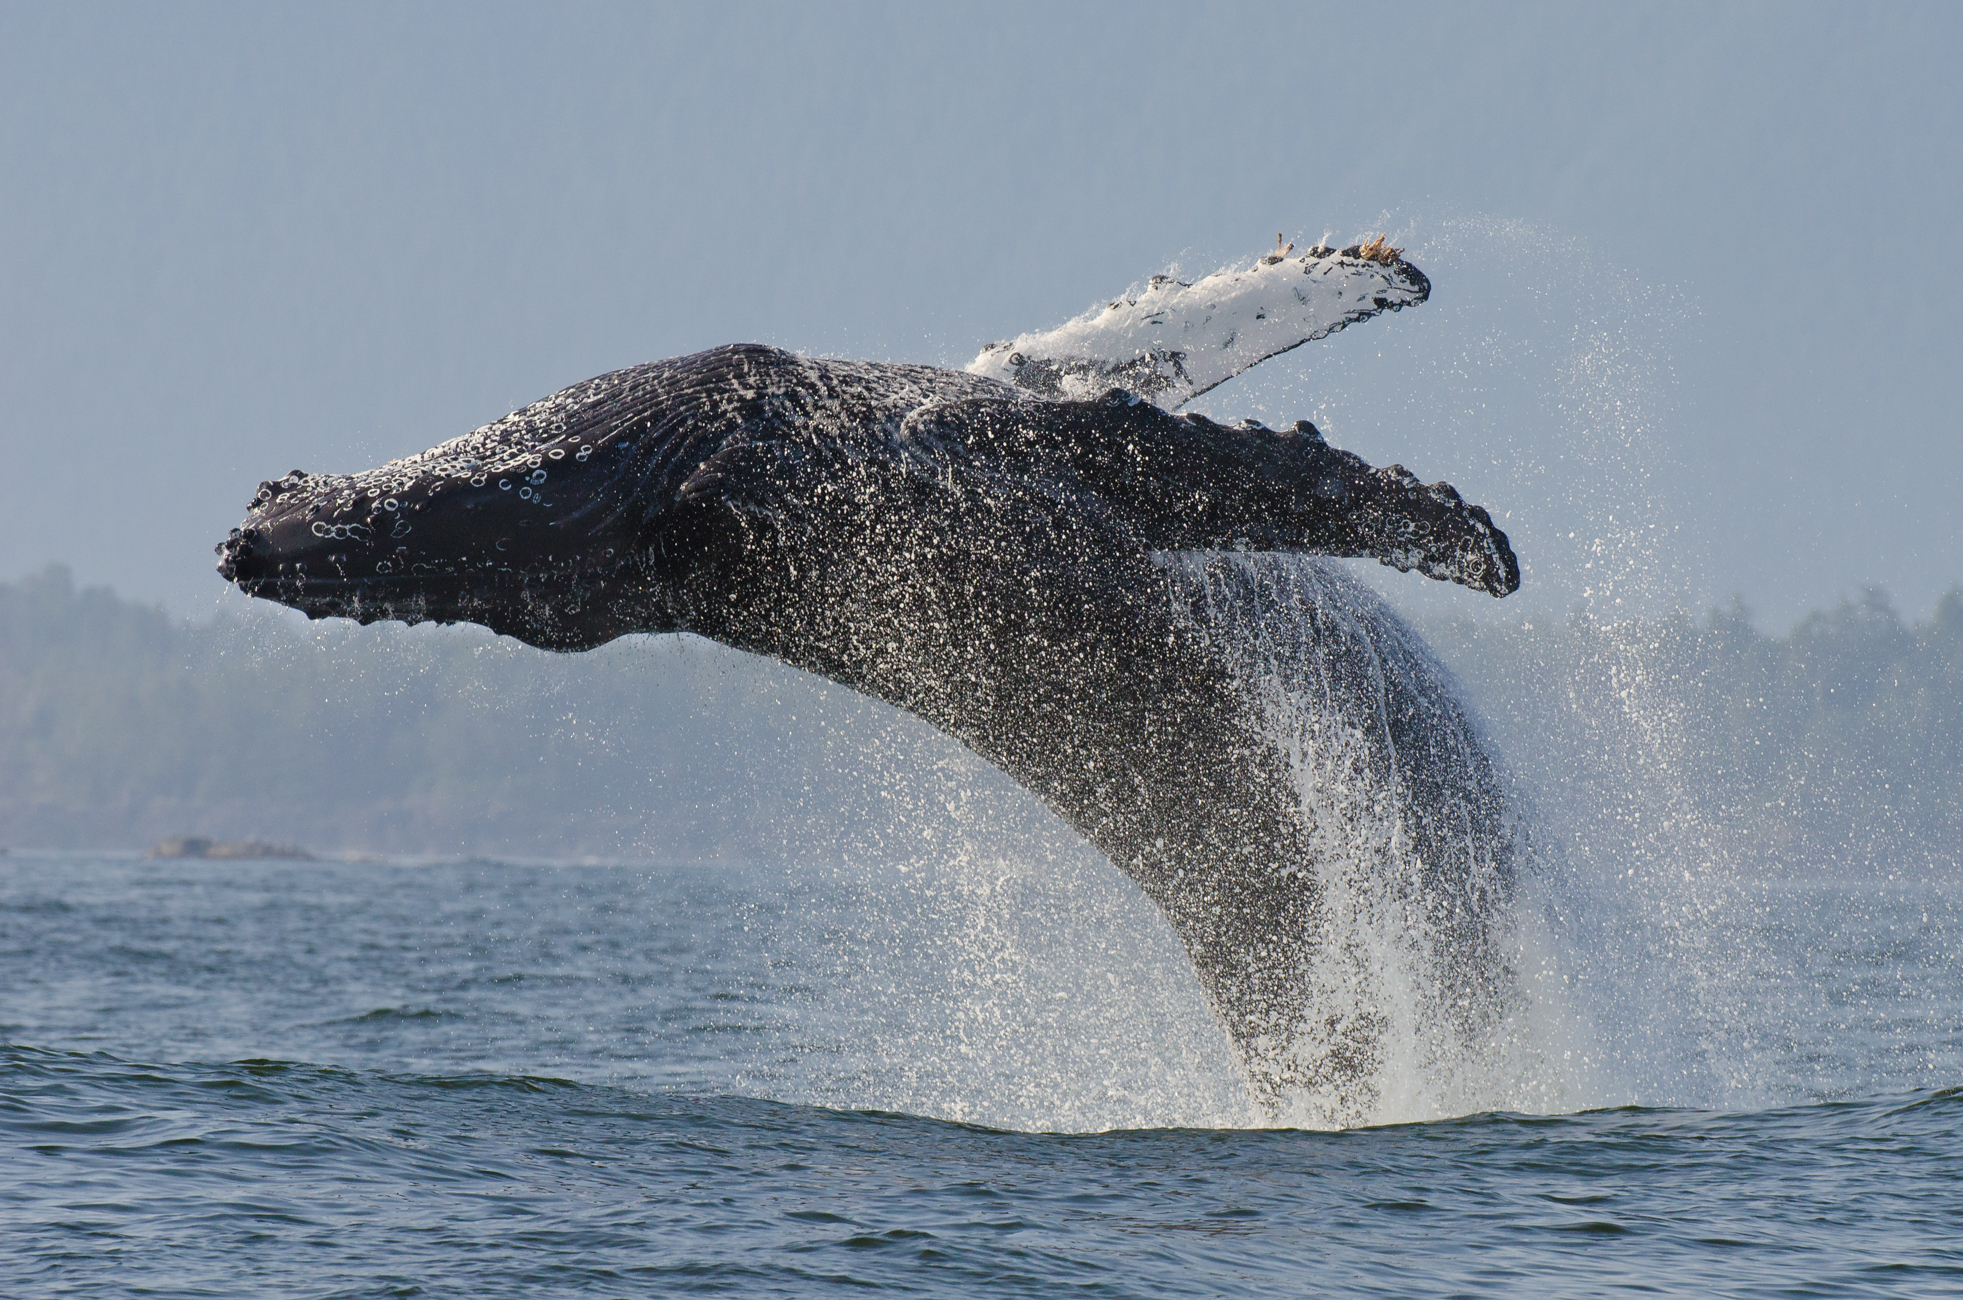  A 16m adult humpback whale breaches out of the water. 